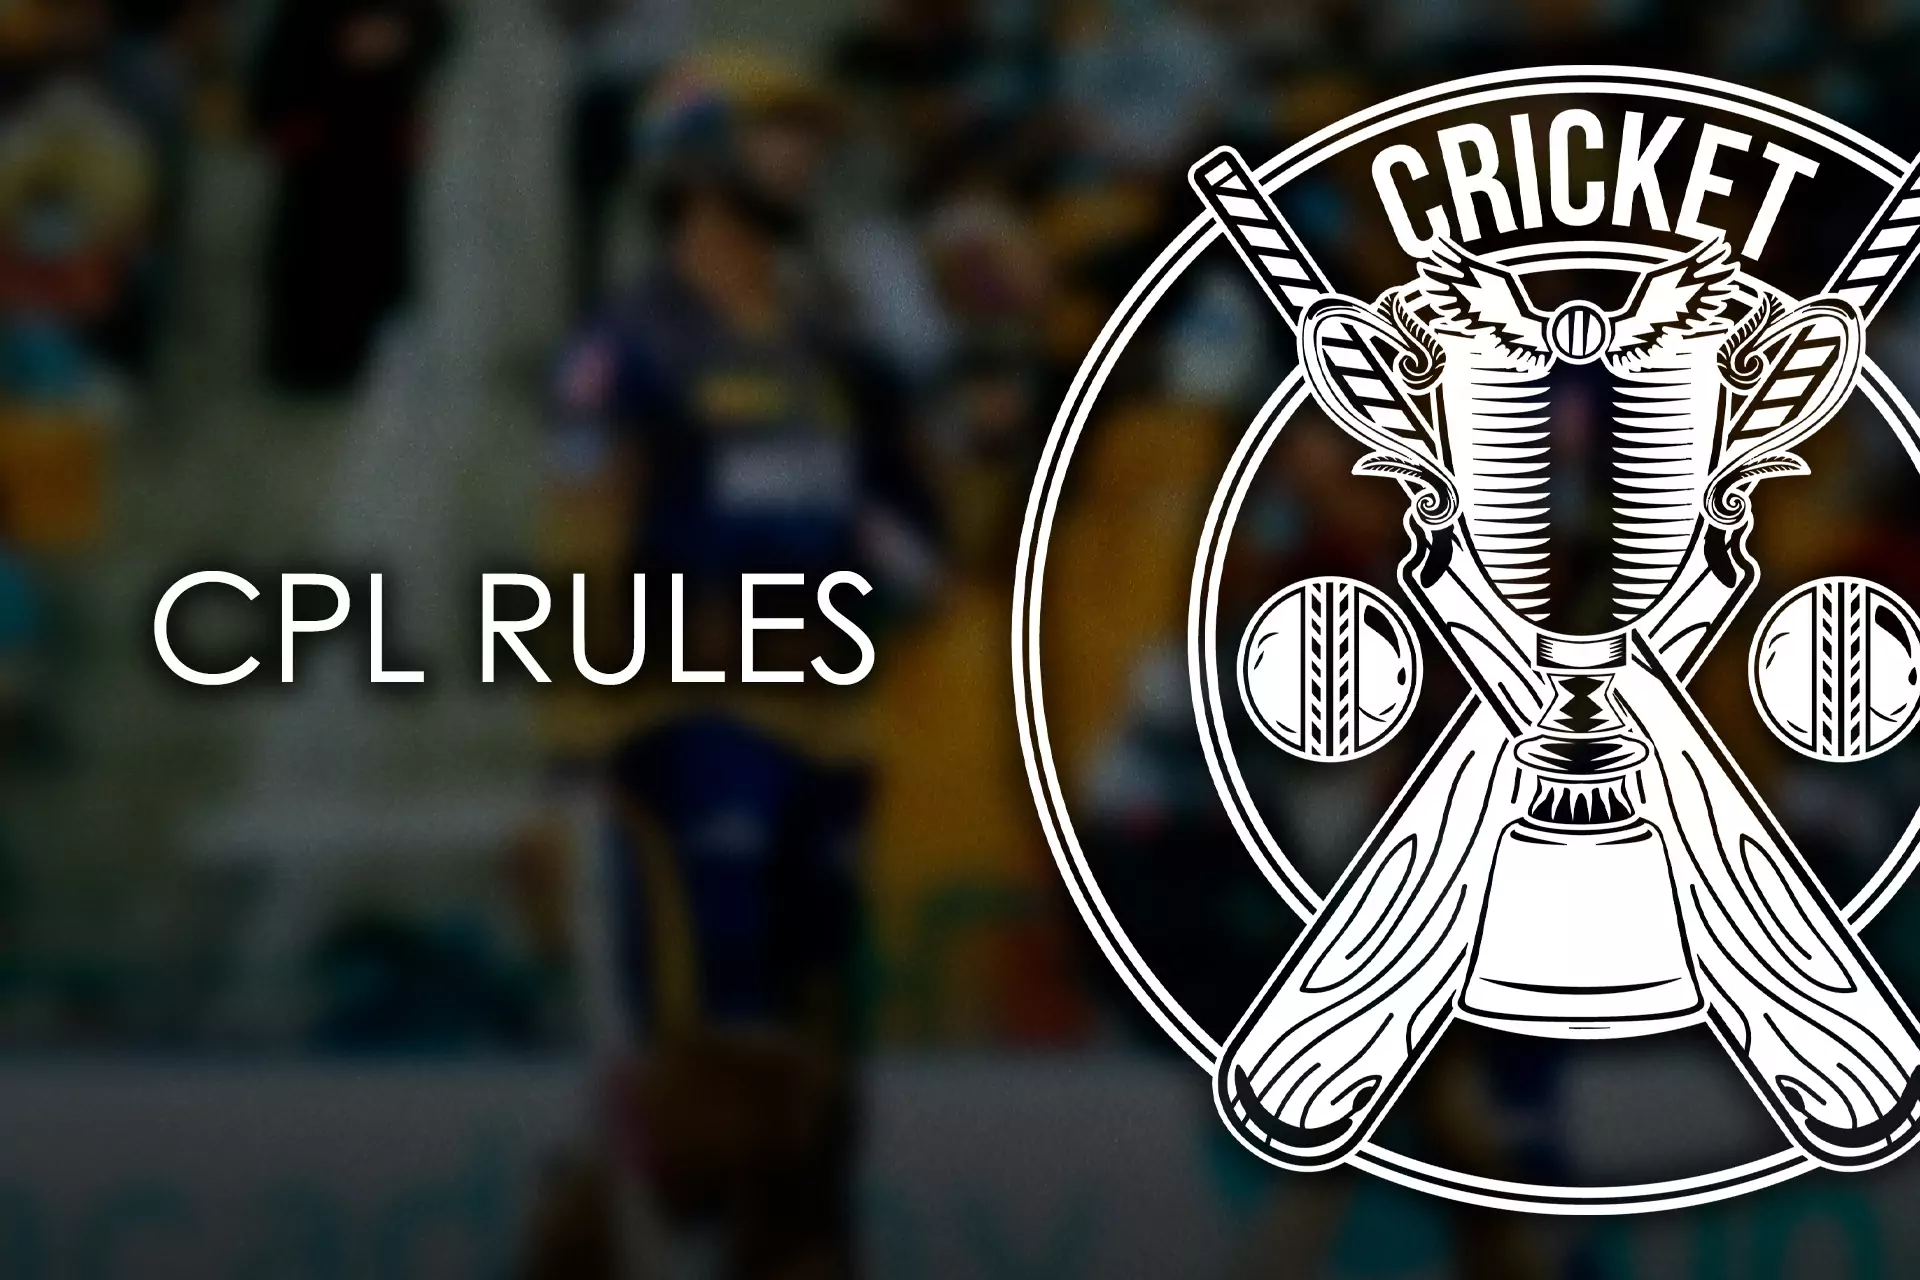 To be able to analyze CPL events you have to know the special rules of the tournament.